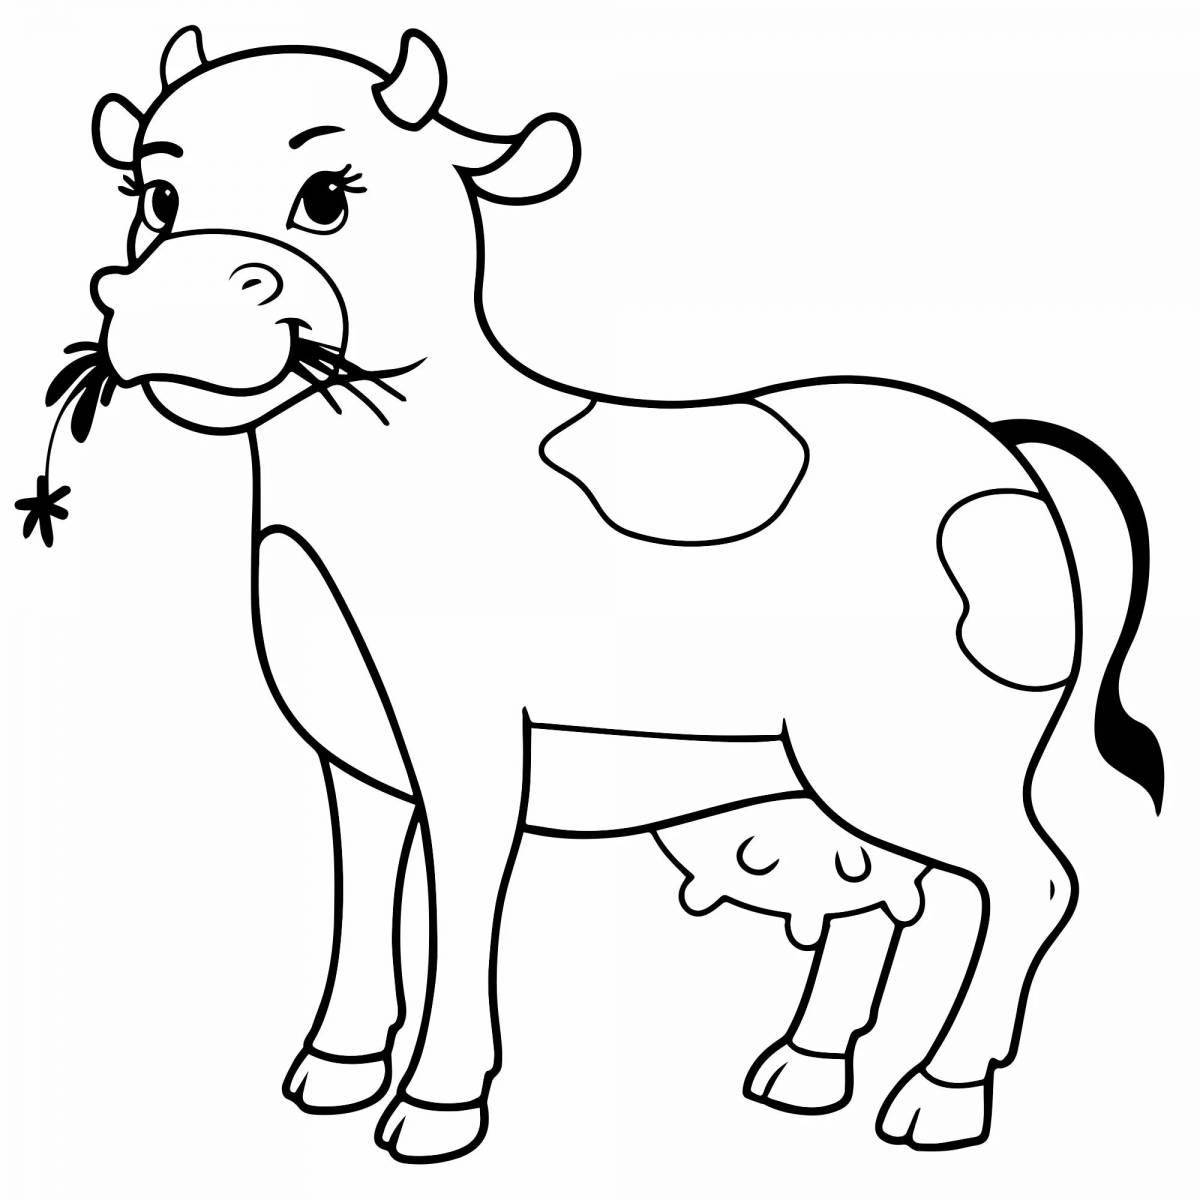 Colorful cow coloring book for kids